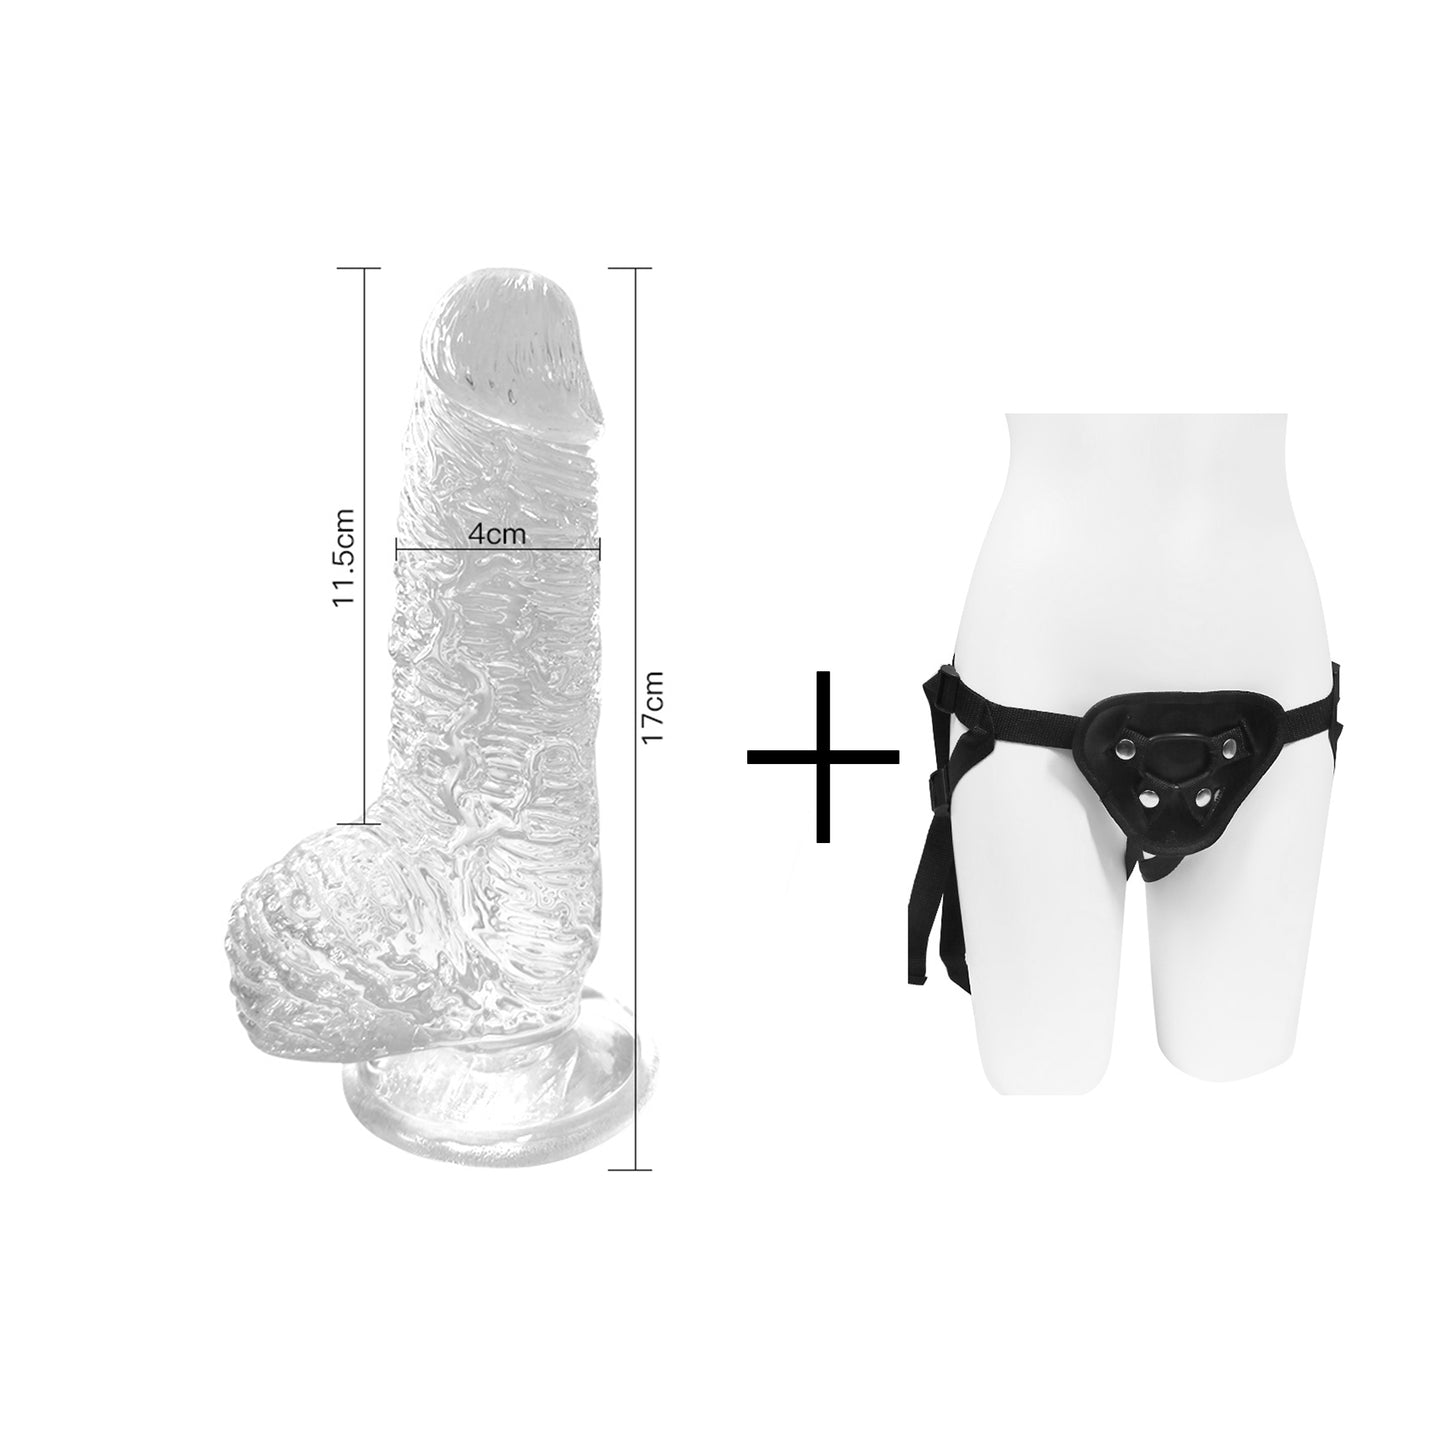 Clear Crystal High Quality Healthy Material Silicone Transparent Dildo